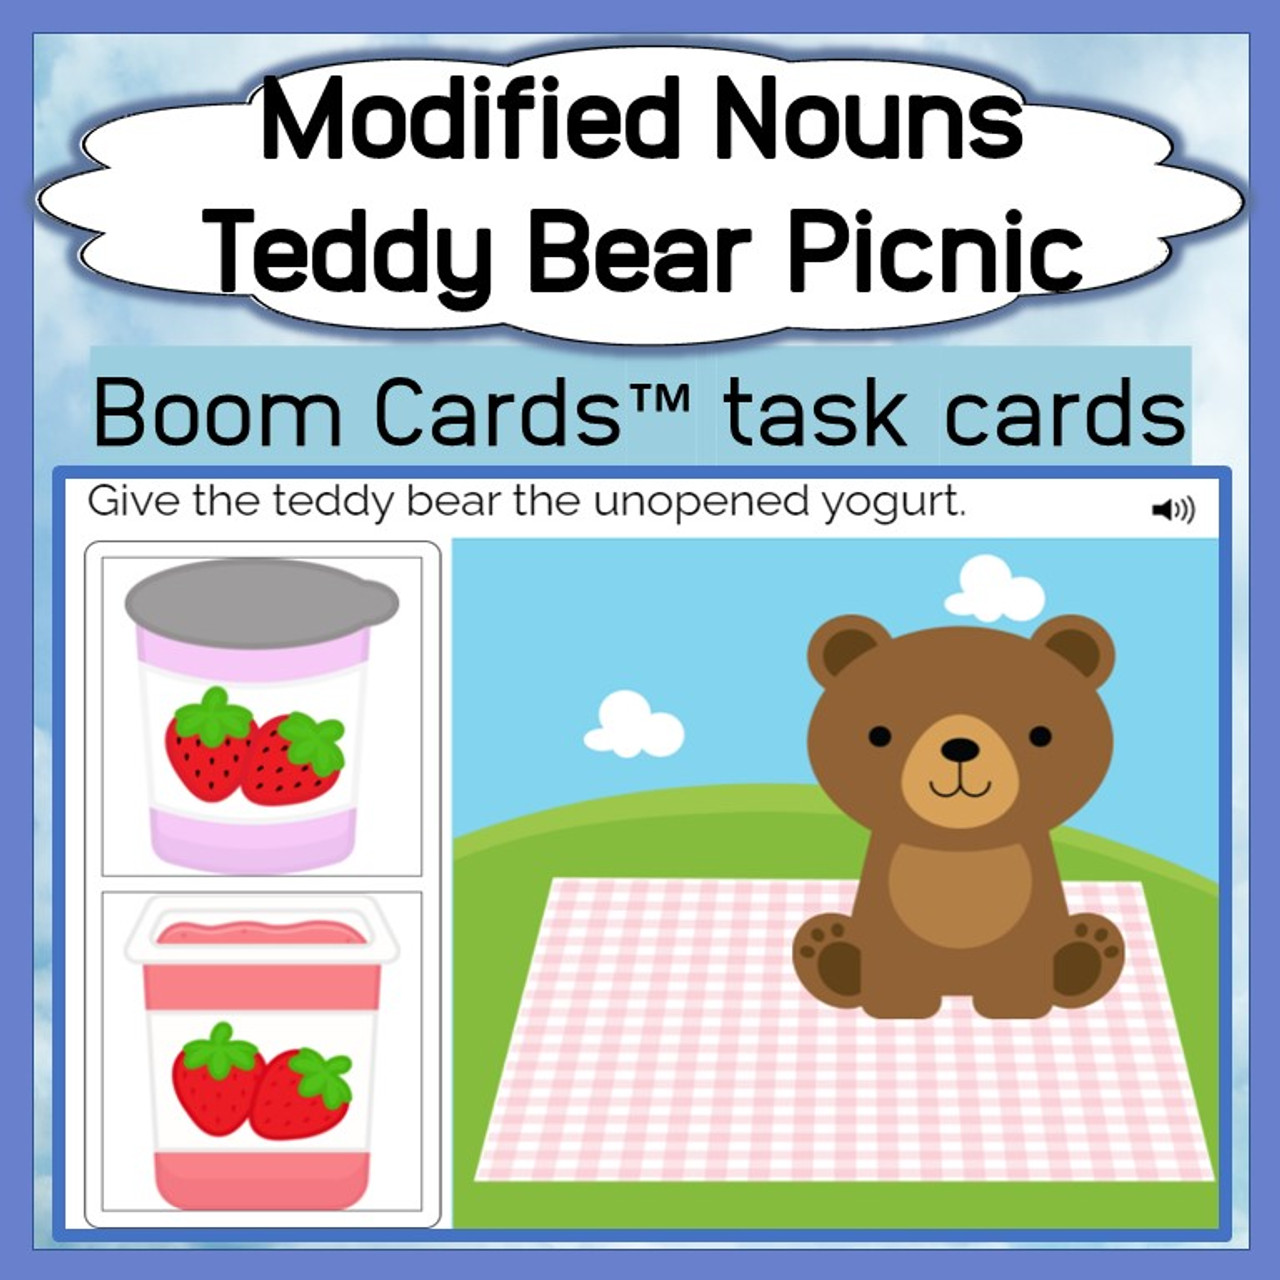 Modified Nouns - Level One - Interactive Deck - Teddy Bear Picnic - Boom Cards™